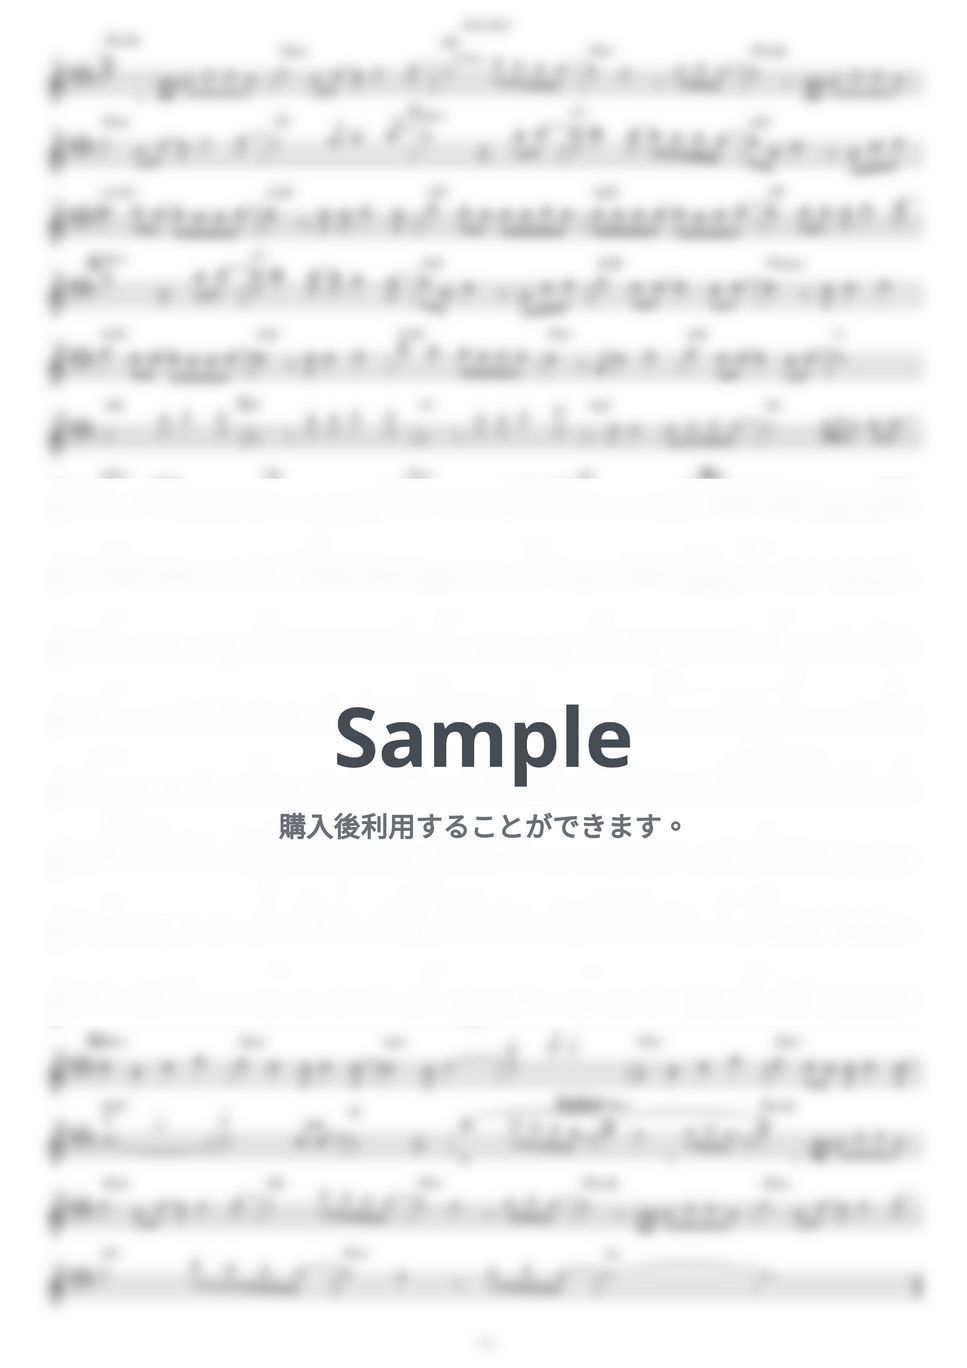 Official髭男dism - SOULSOUP (『劇場版 SPY×FAMILY CODE: White』 / in Bb) by muta-sax